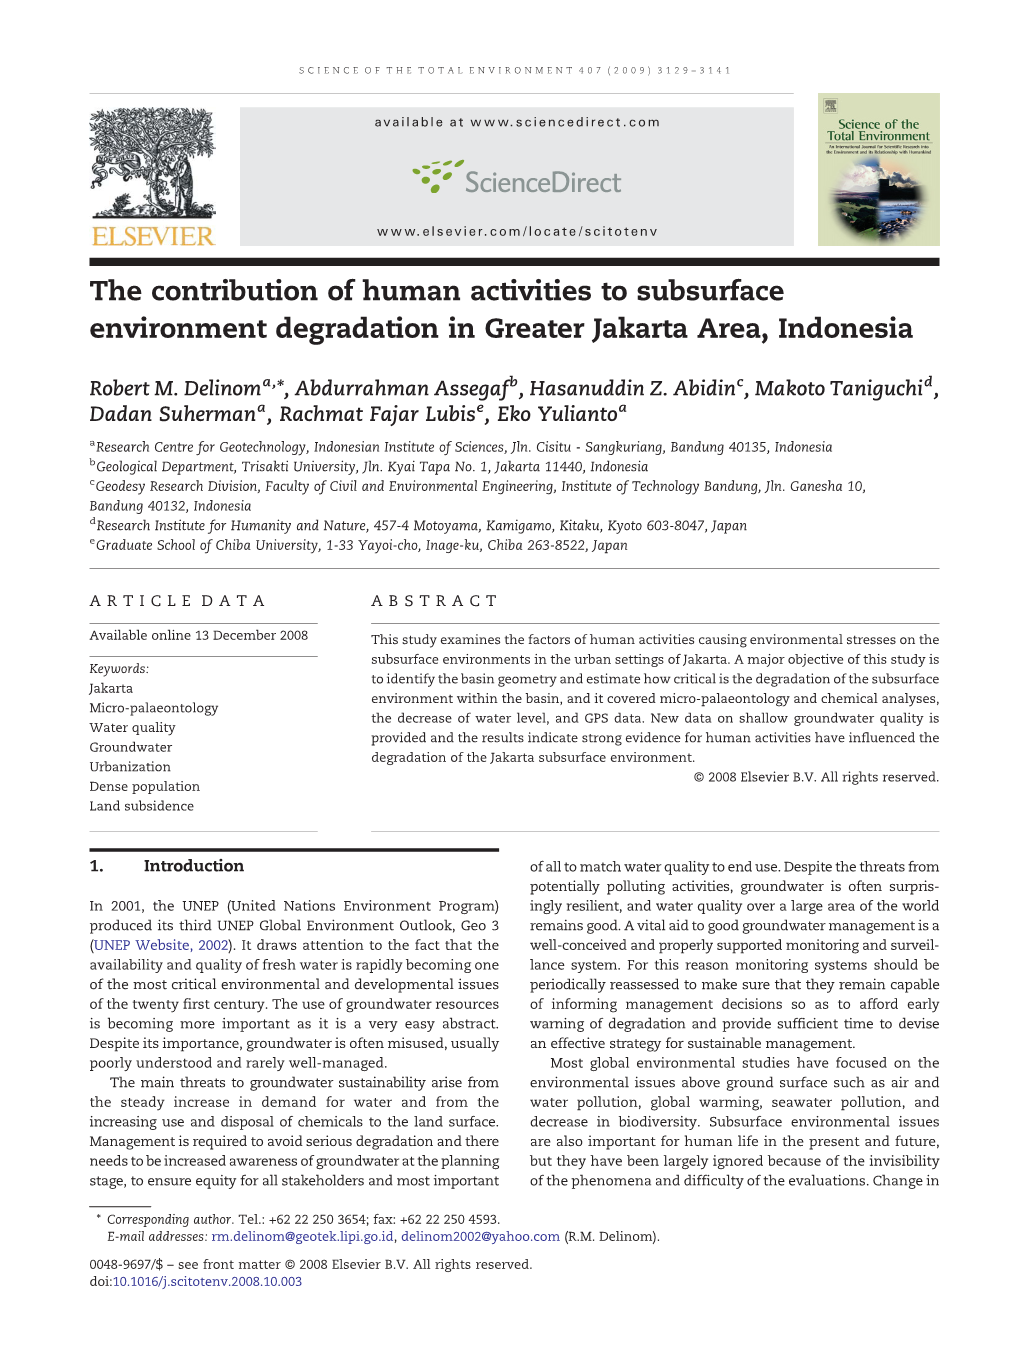 The Contribution of Human Activities to Subsurface Environment Degradation in Greater Jakarta Area, Indonesia